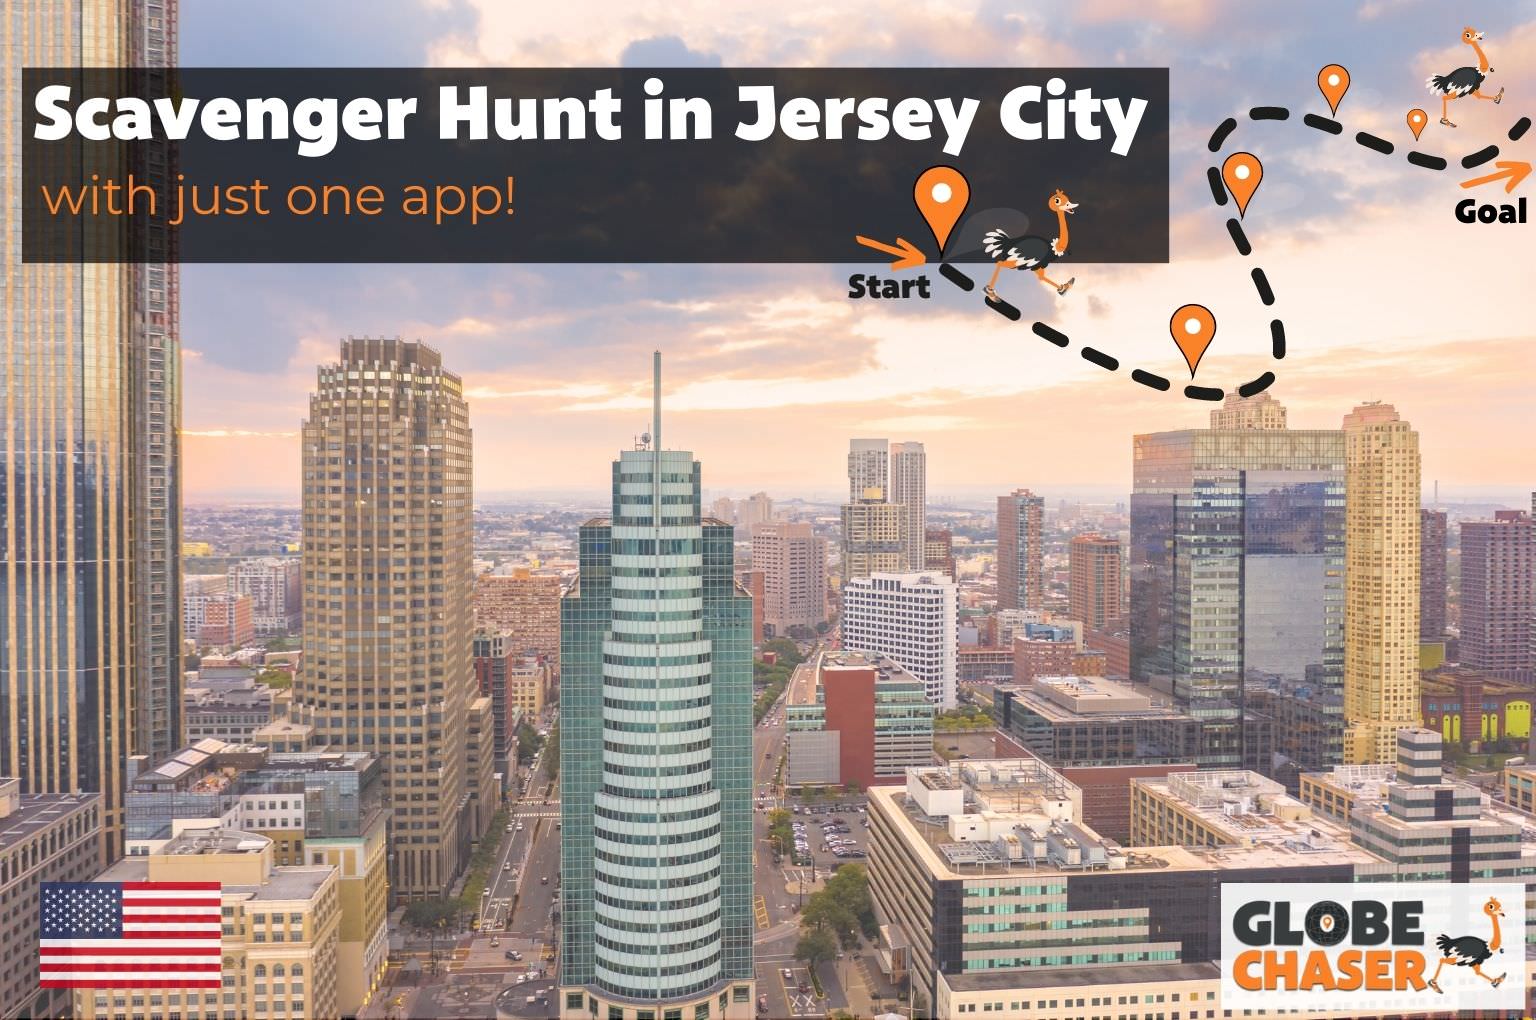 Scavenger Hunt in Jersey City, USA - Family Activities with the Globe Chaser App for Outdoor Fun